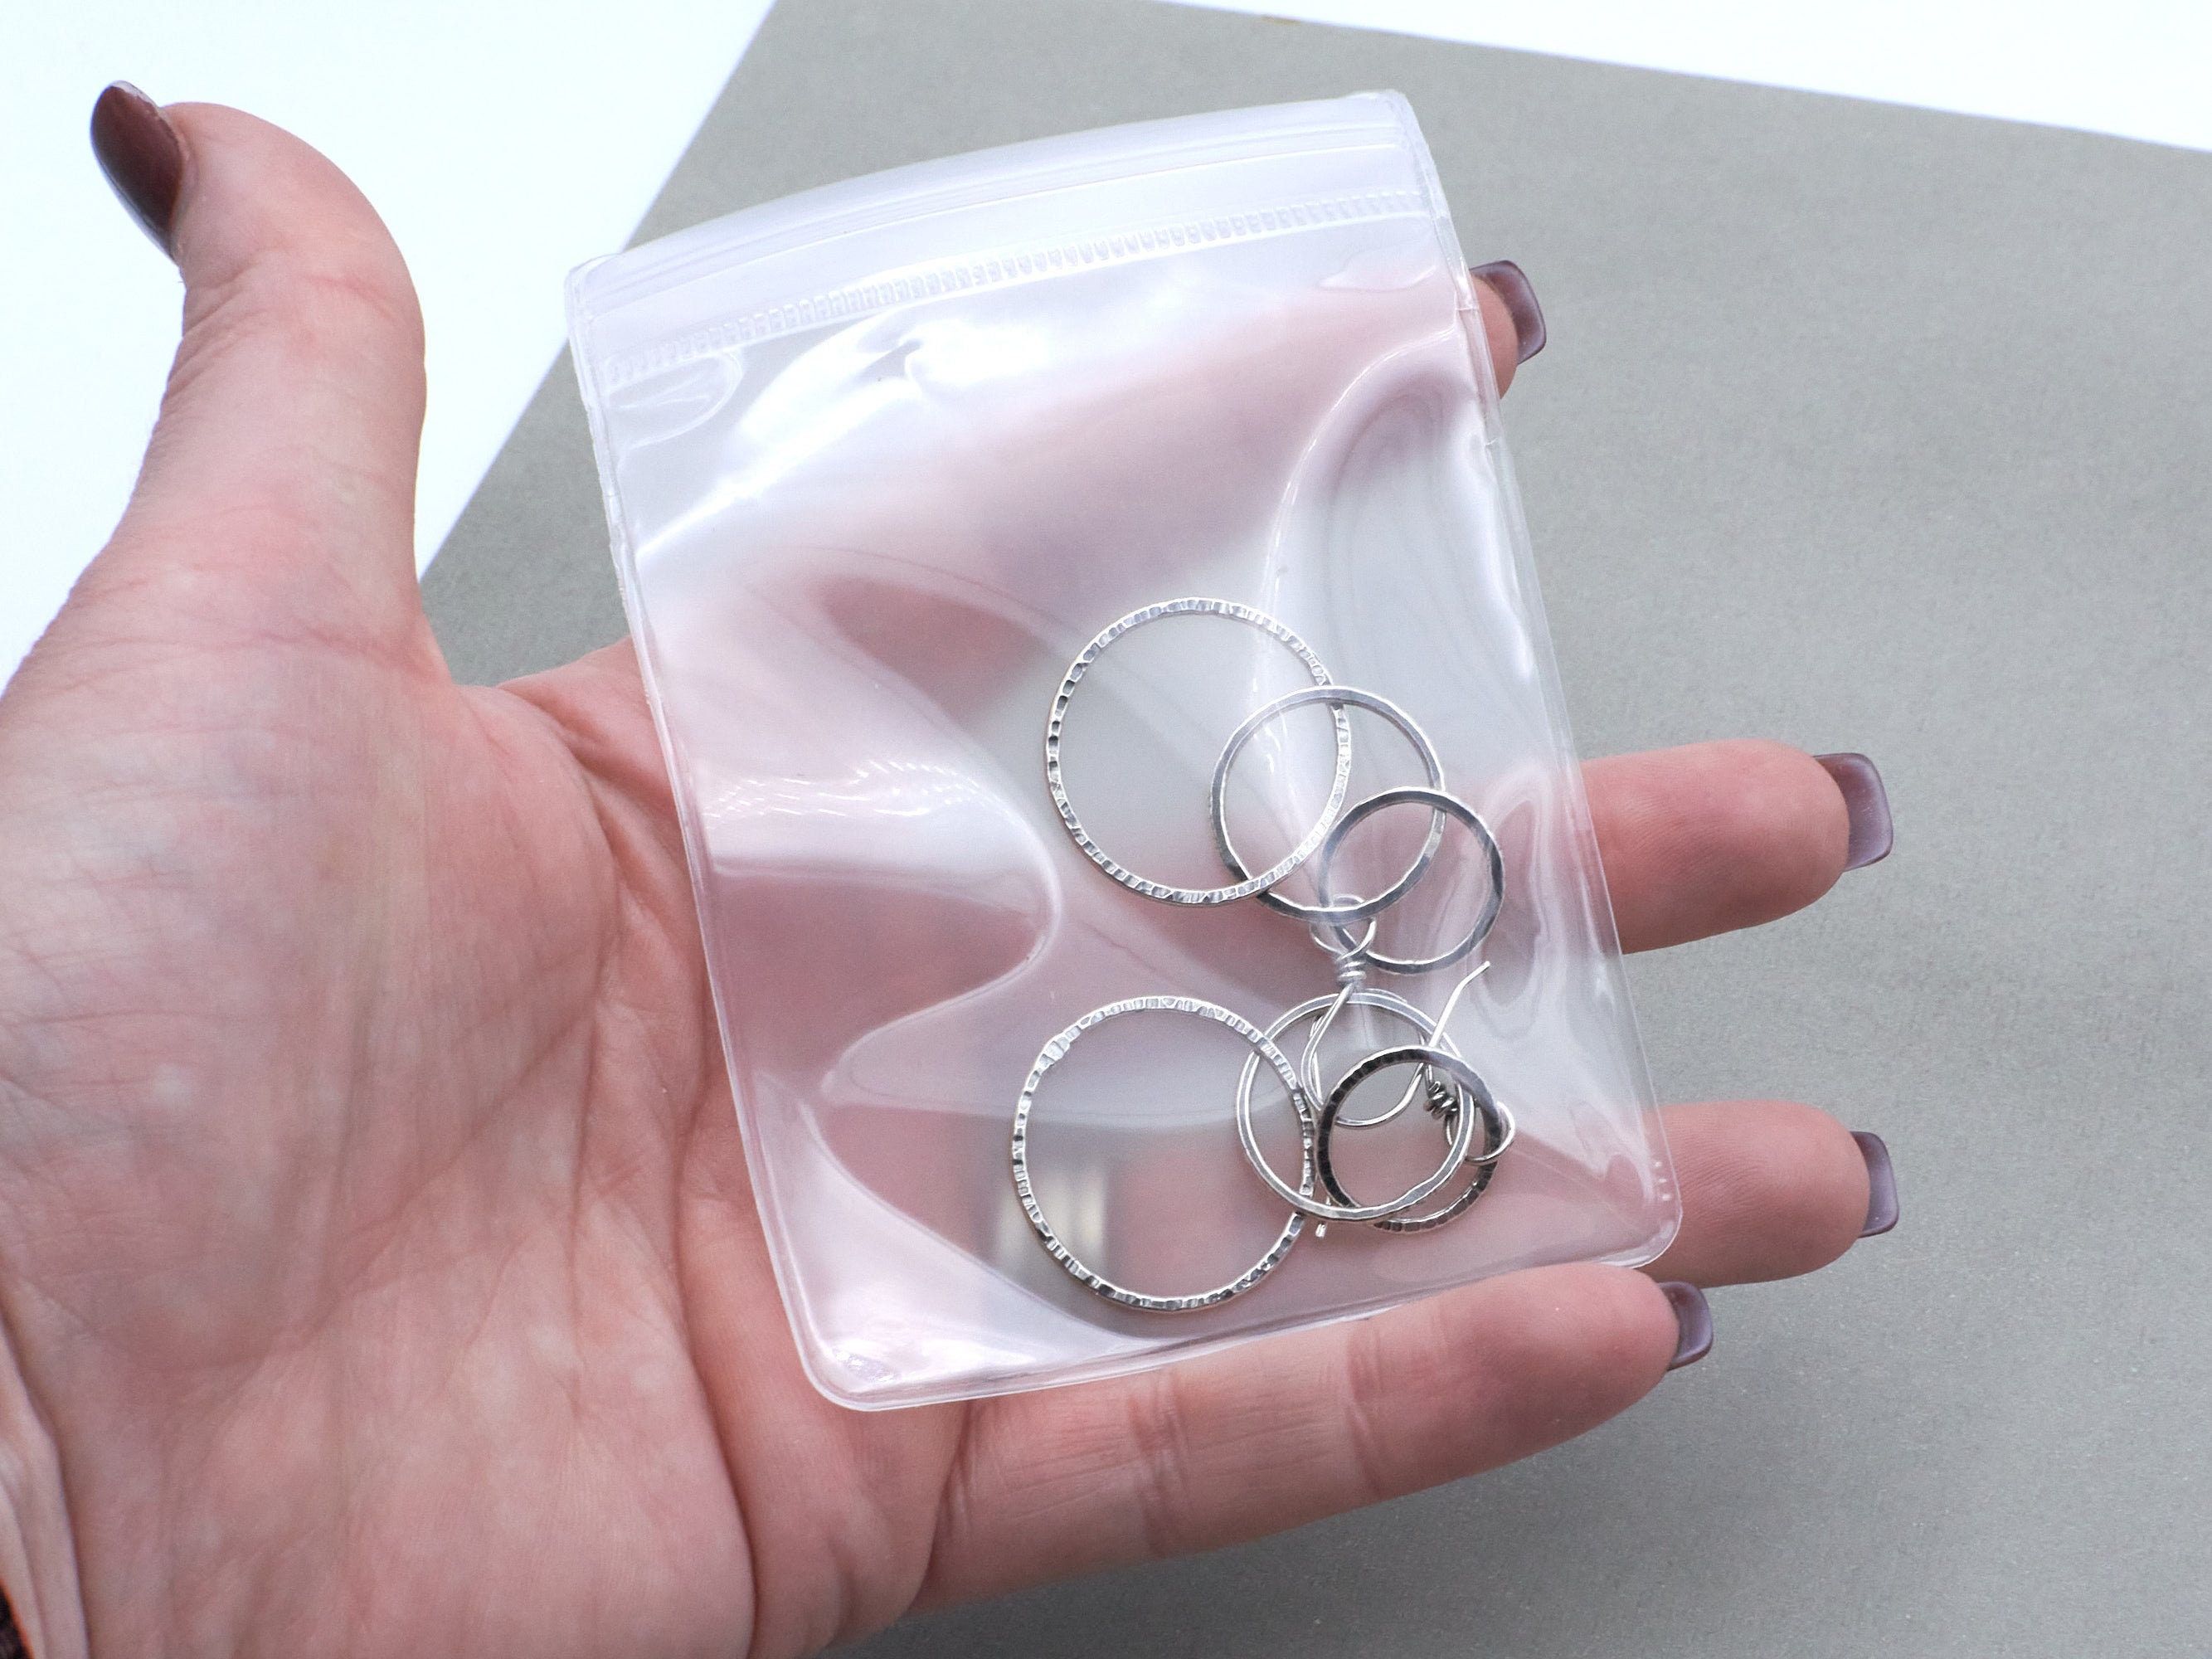 Jewelry Storage Bags Clear Plastic Transparent Jewelry Reclosable